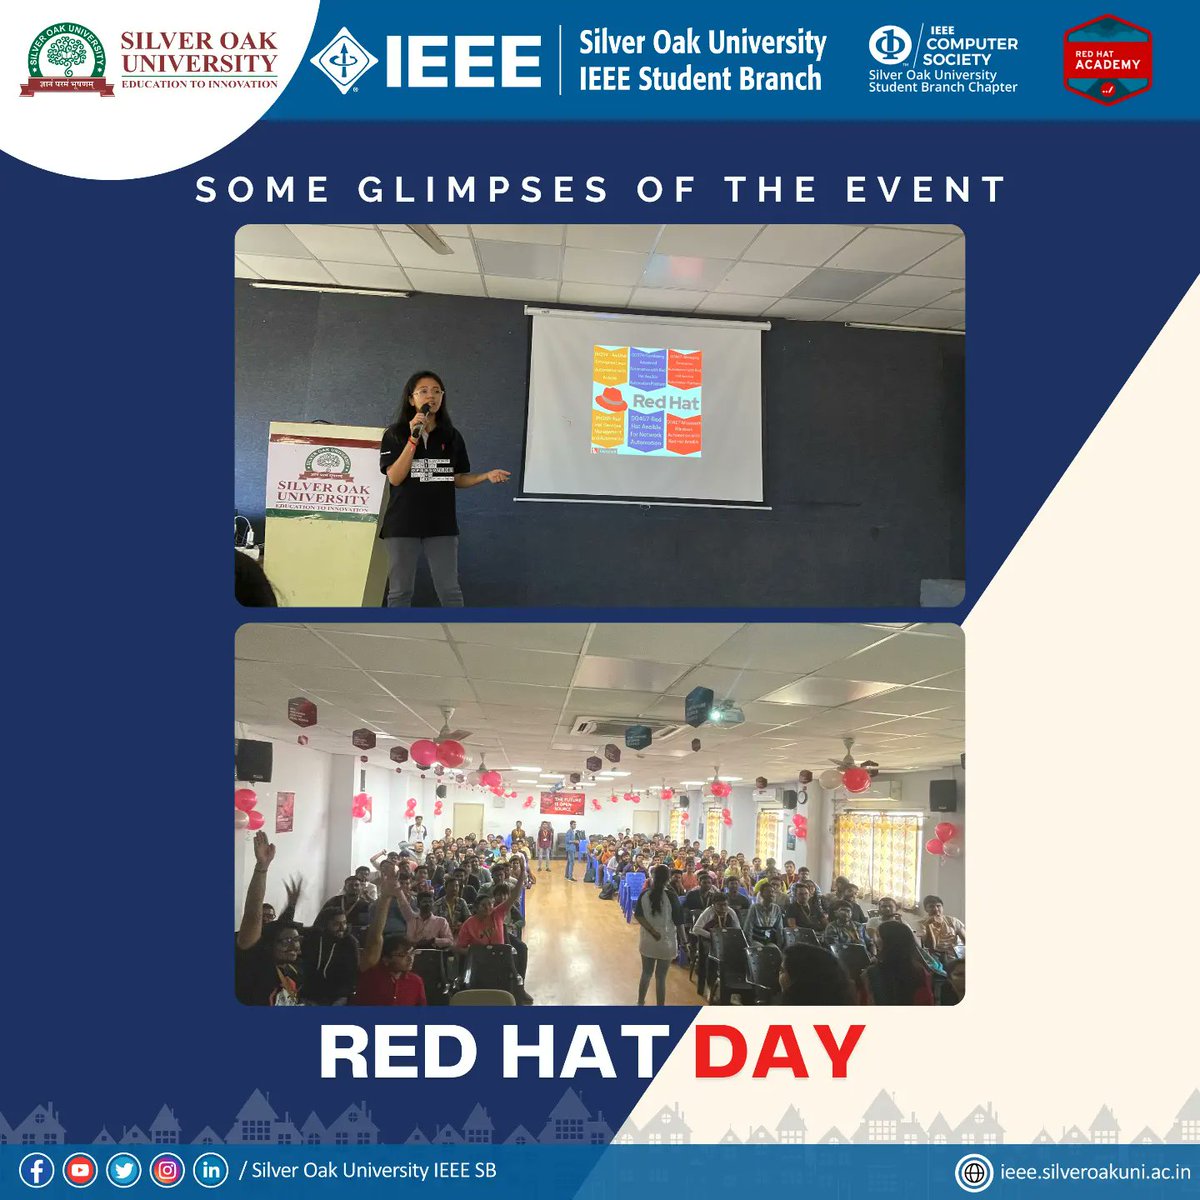 #RedHatAcademySOU in collaboration with #IEEESOUCSSBC at #SilverOakUniversity celebrated #RedHatDay on 23 Feb `23, a remarkable event that brought students, educators, and industry experts together to celebrate the power of #open_source #technology and education.#ieee #sou #sousb